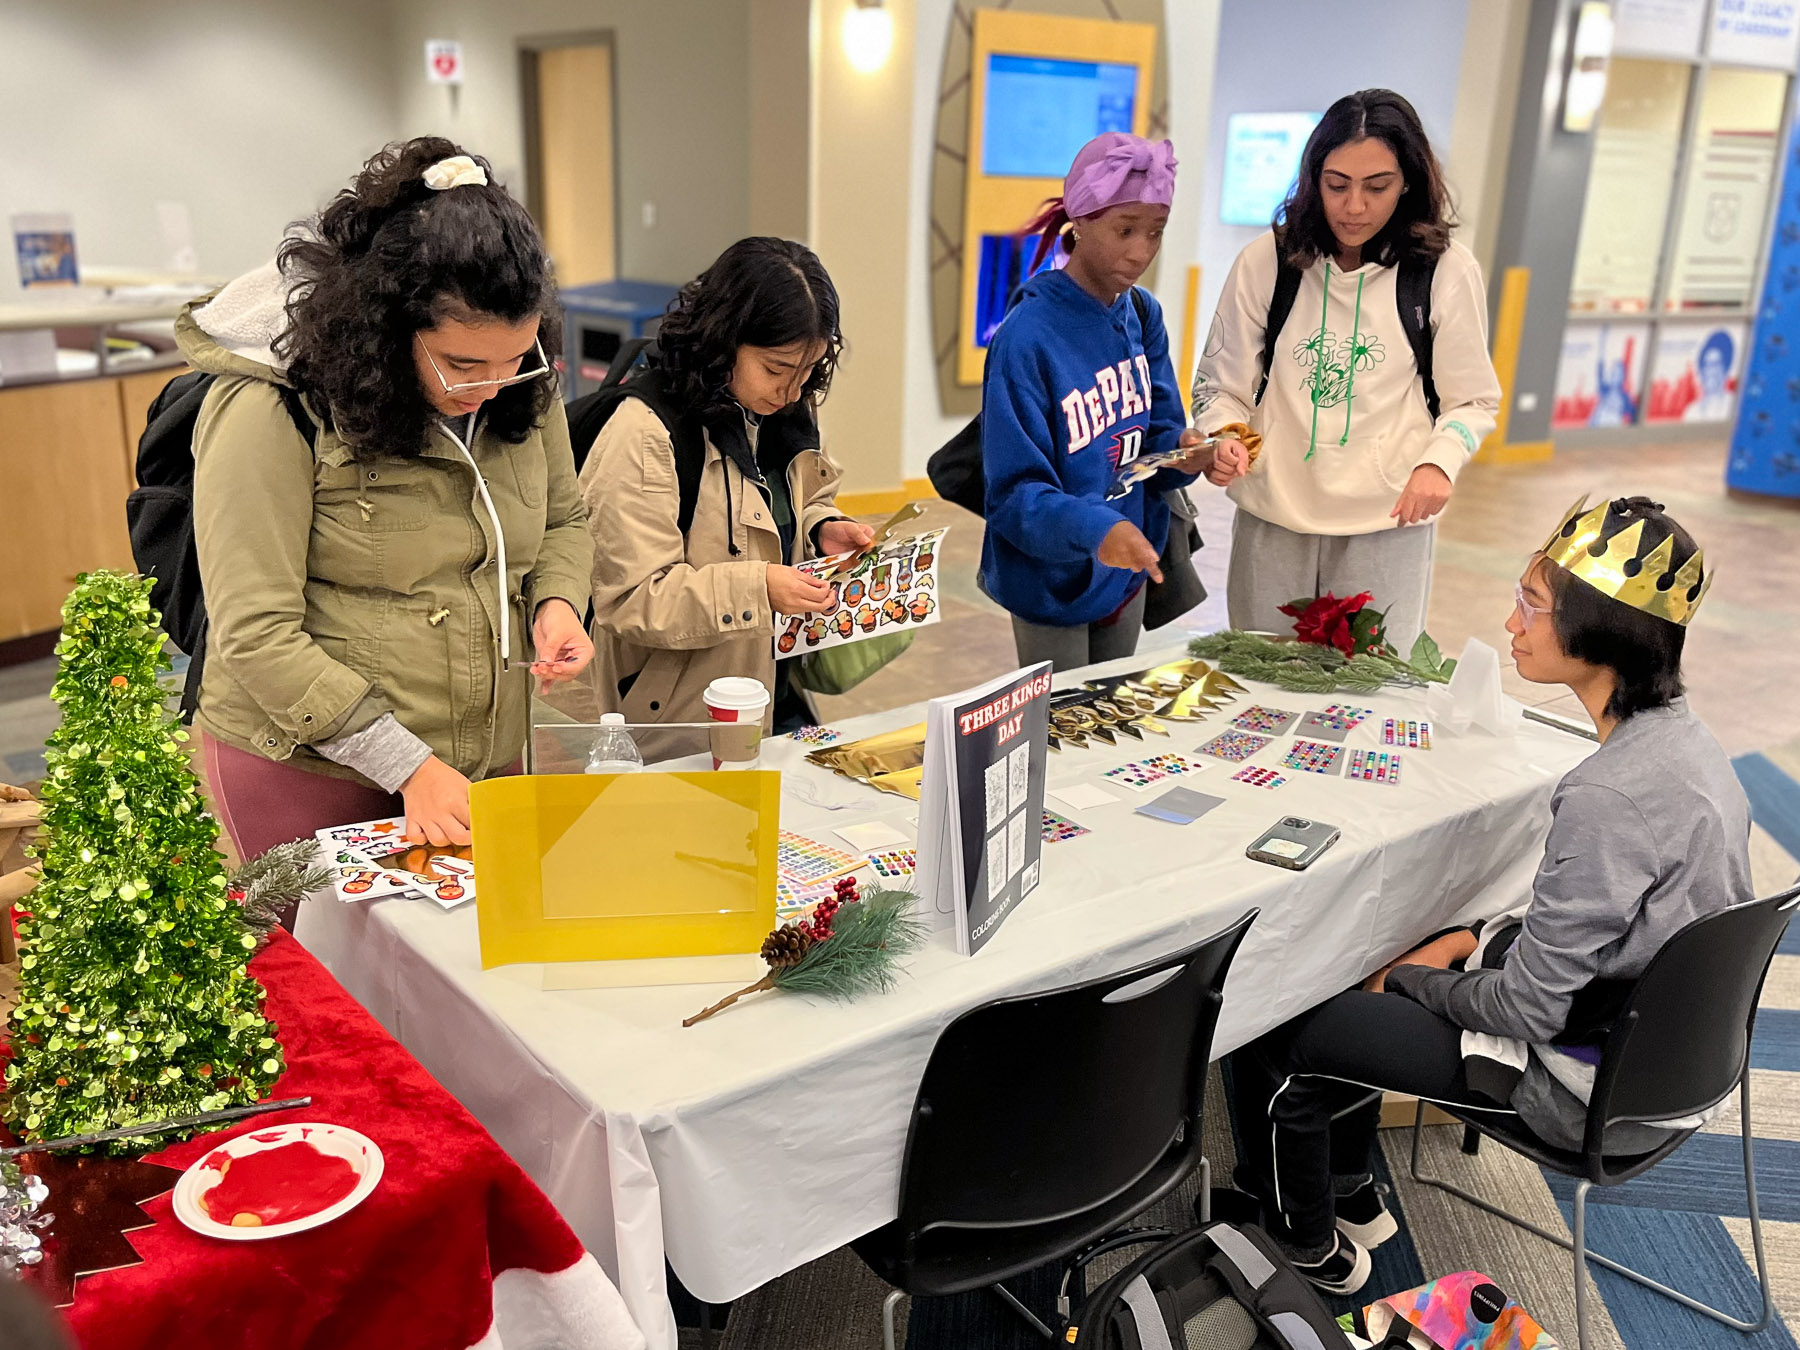 The event took a journey around to world to show how other cultures and religions celebrate the holiday season. (Photo by Maria Hench / DePaul University)